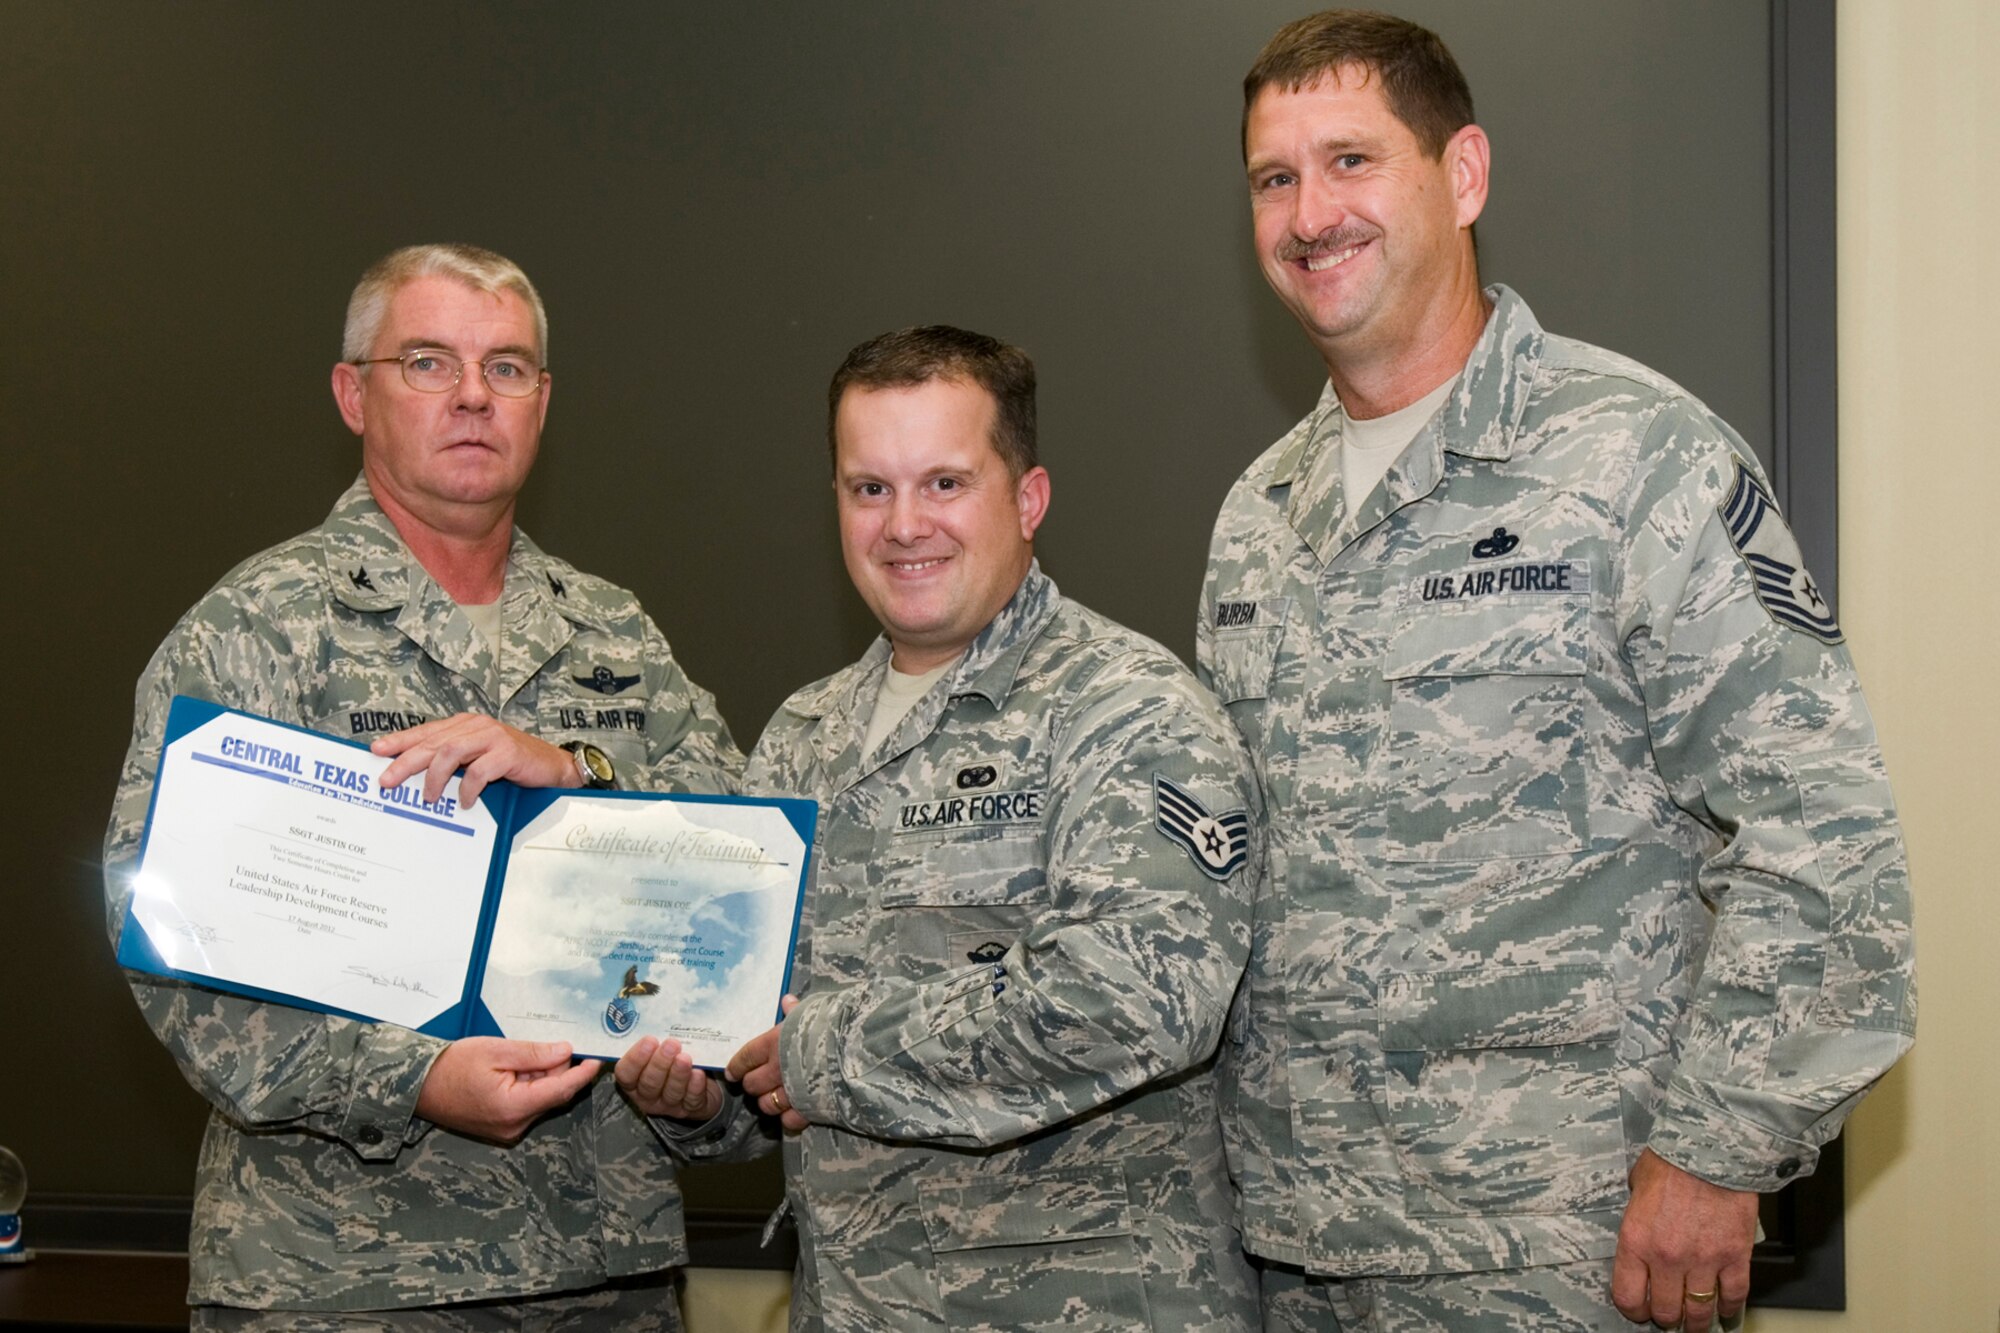 GRISSOM AIR RESERVE BASE, Ind. -- Staff Sgt. Justin Coe, 434th Security Forces Squadron security response team member, receives a certificate of training from Col. Don Buckley, 434th Air Refueling Wing commander, and Chief Master Sergeant James Burba, 434th Maintenance Operations Flight maintenance superintendent, at a graduation ceremony for a Non-Commissioned Officer Leadership Development Course here Aug. 17. Coe graduated the course with 20 other NCOs. (U.S. Air Force photo/Senior Airman Andrew McLaughlin)